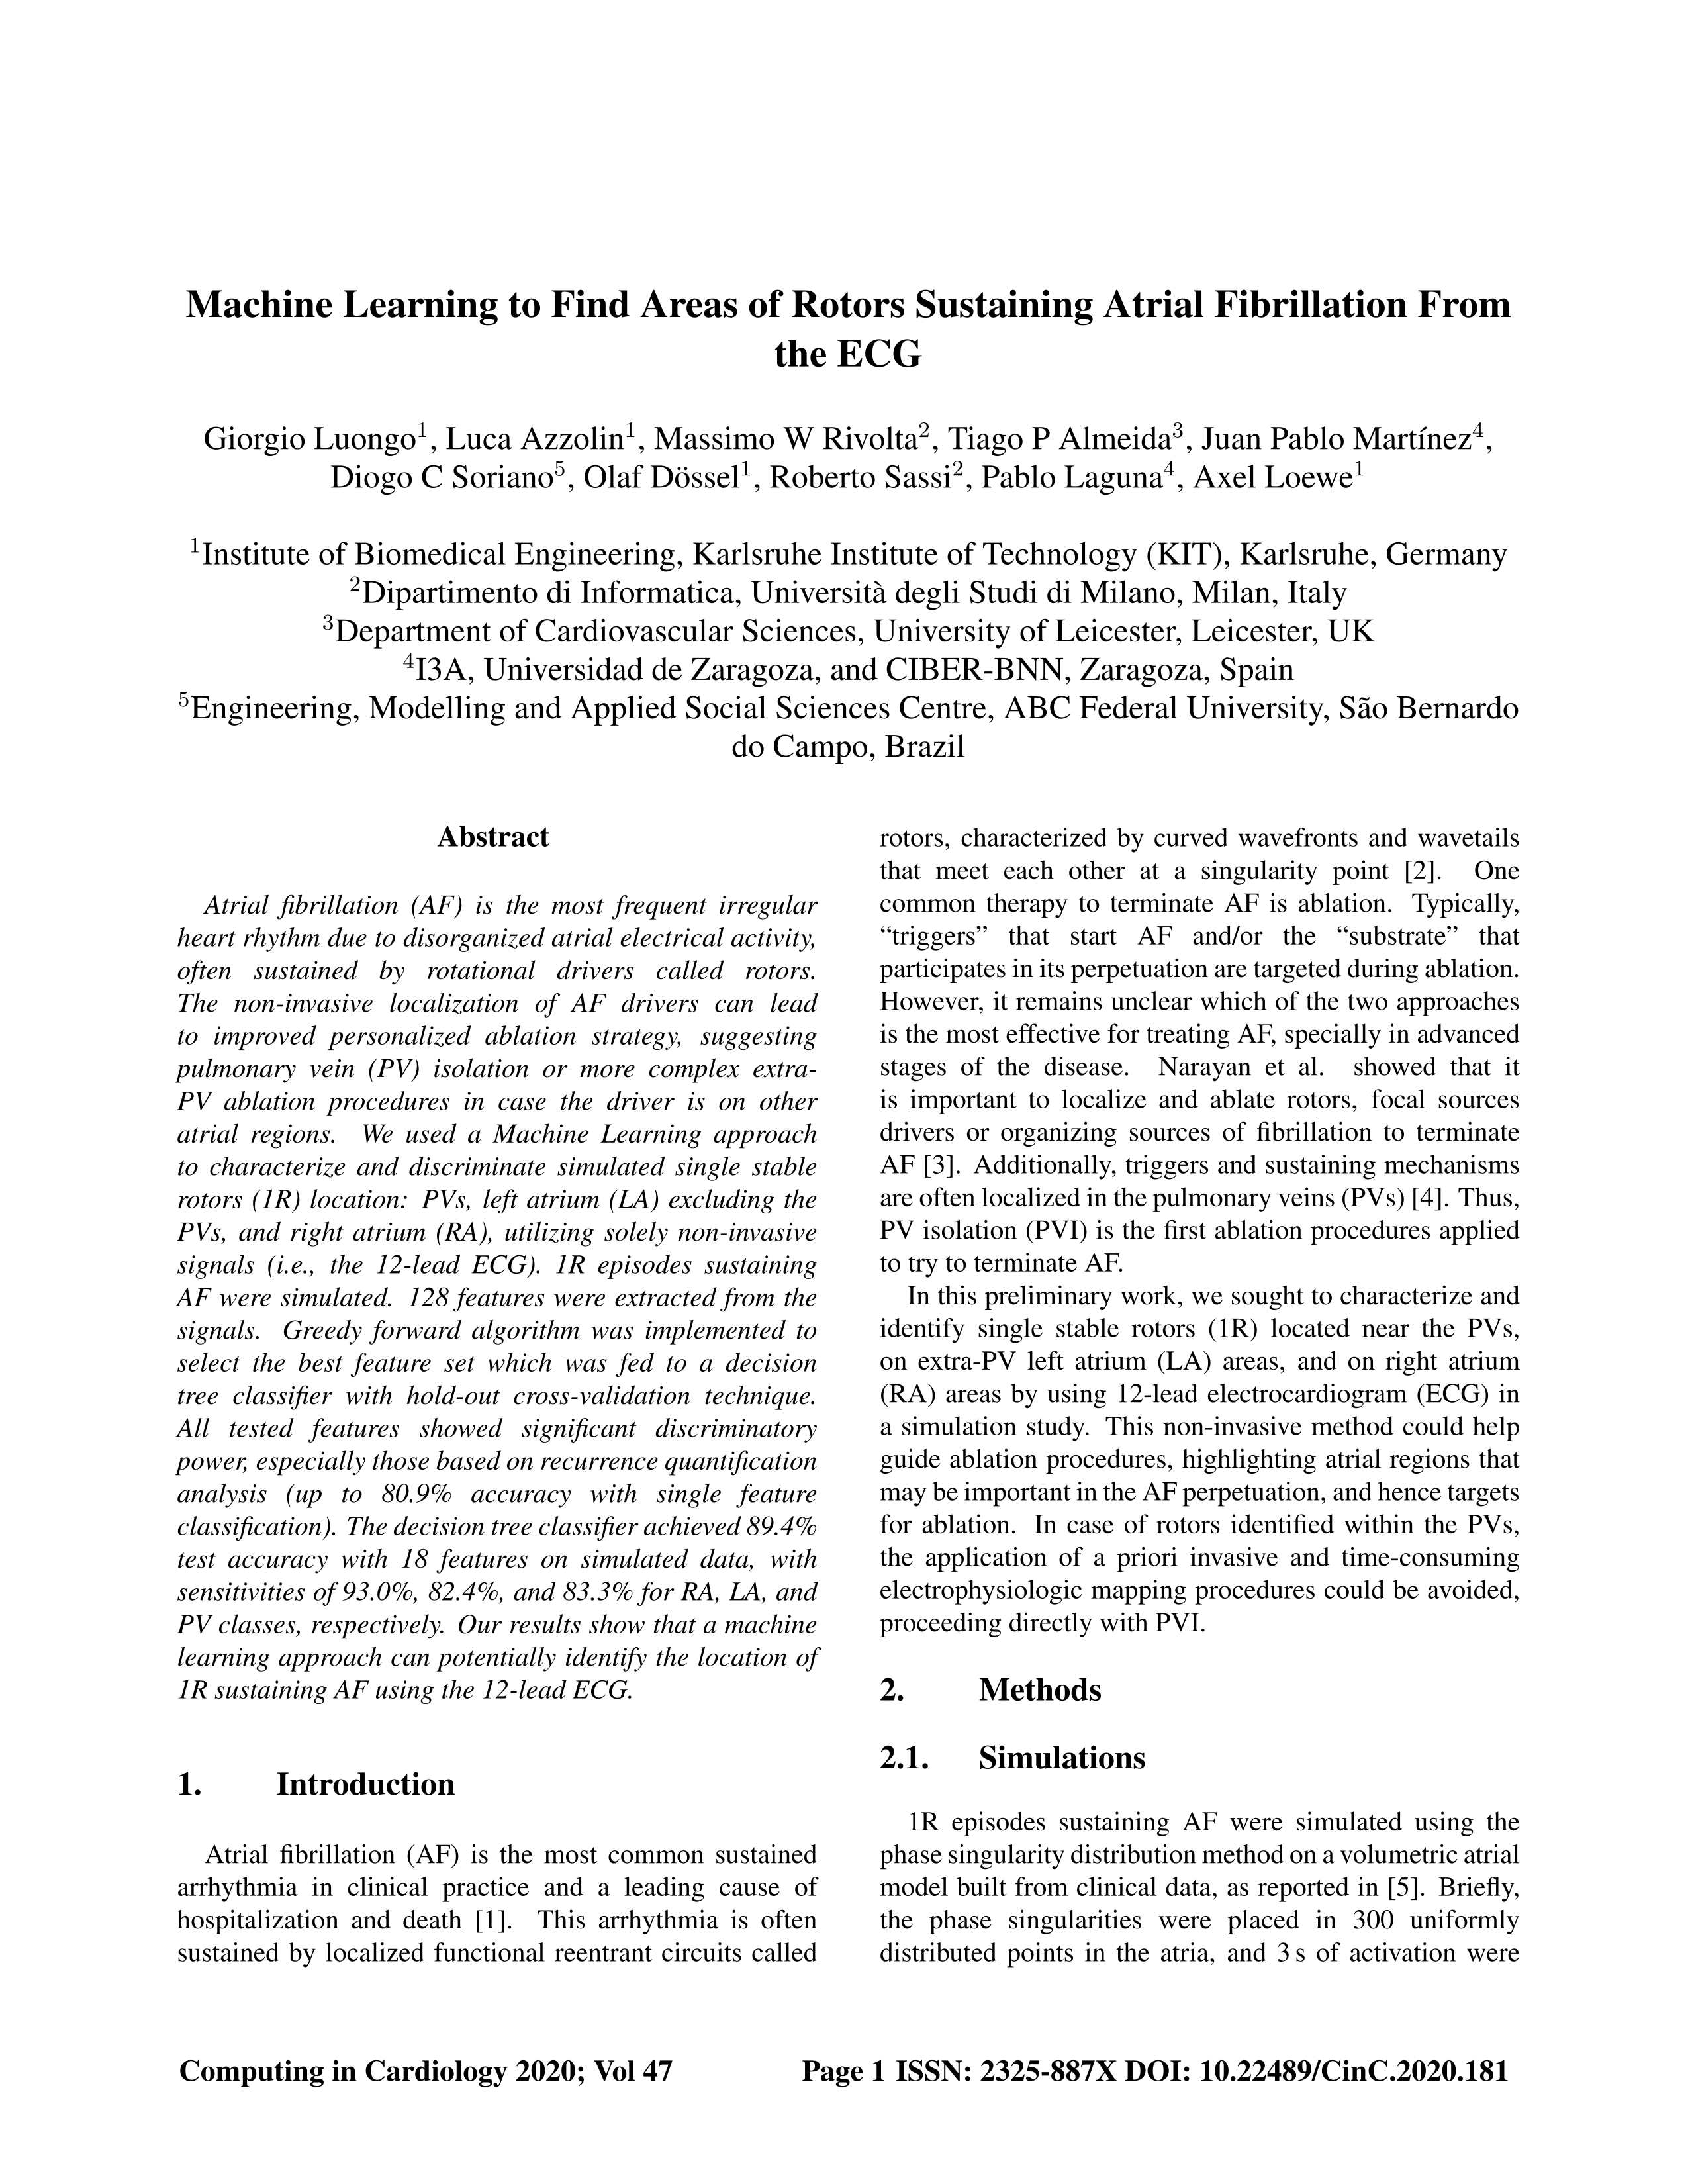 Machine Learning to Find Areas of Rotors Sustaining Atrial Fibrillation from the ECG